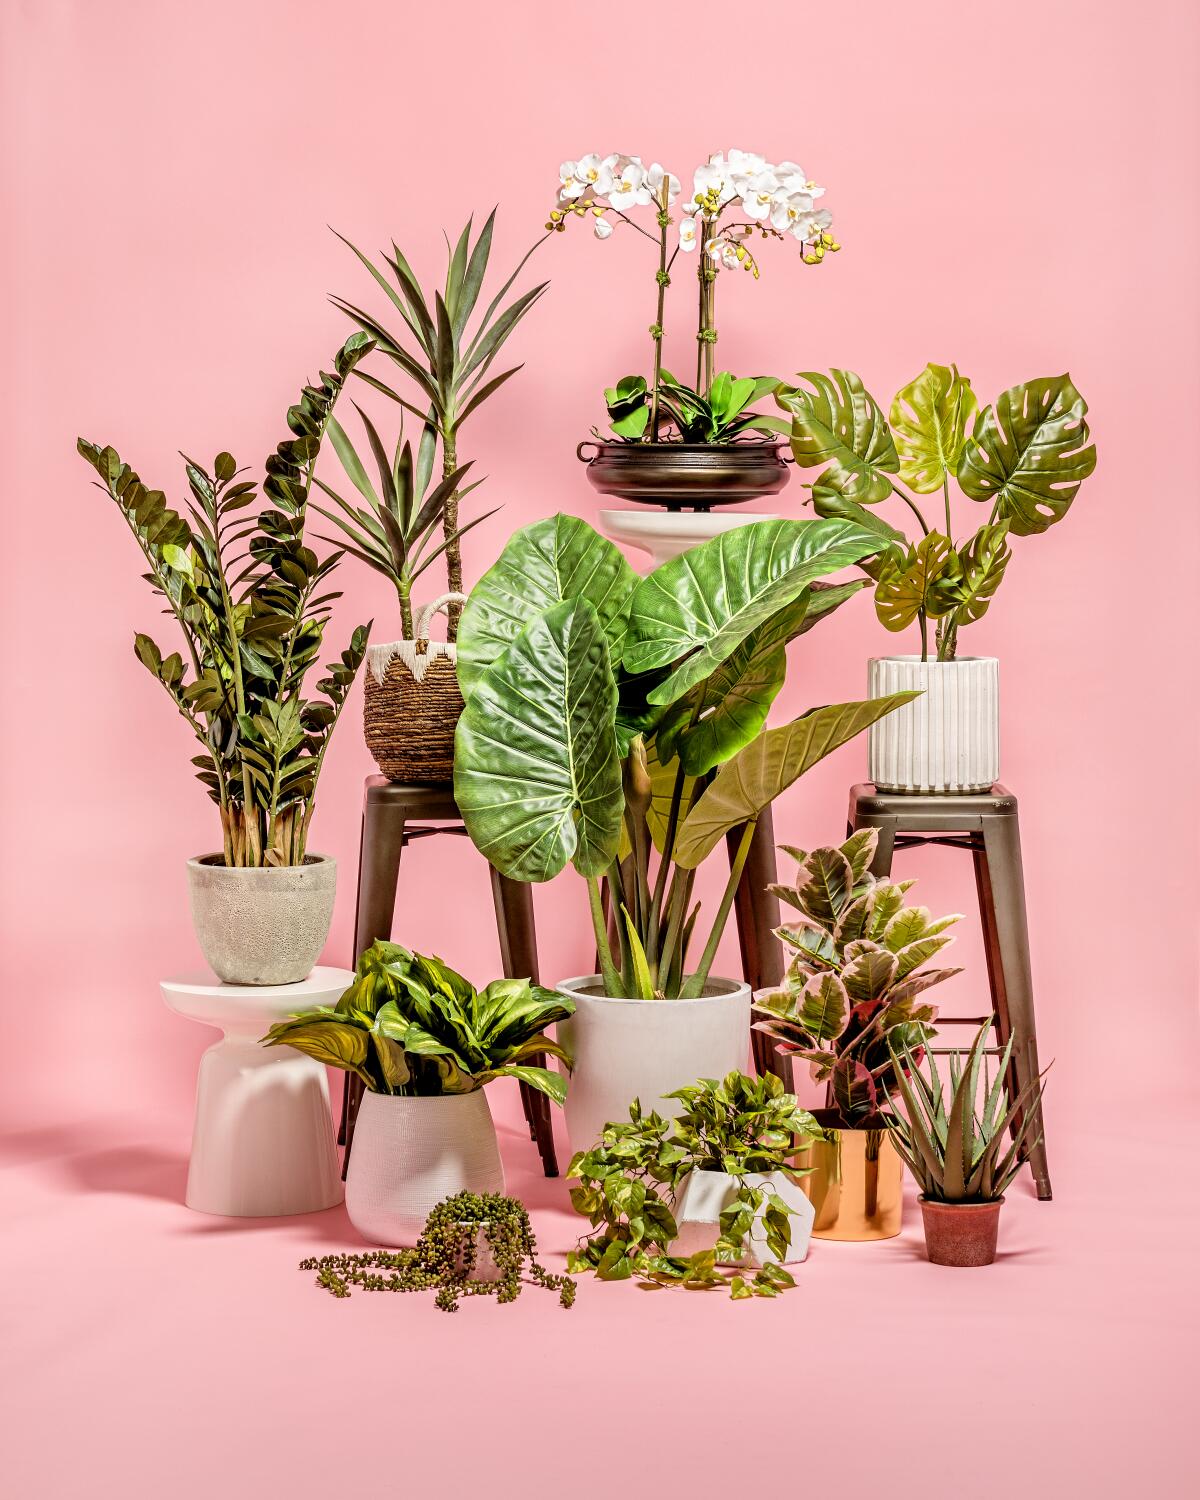 Today's faux plants look real.